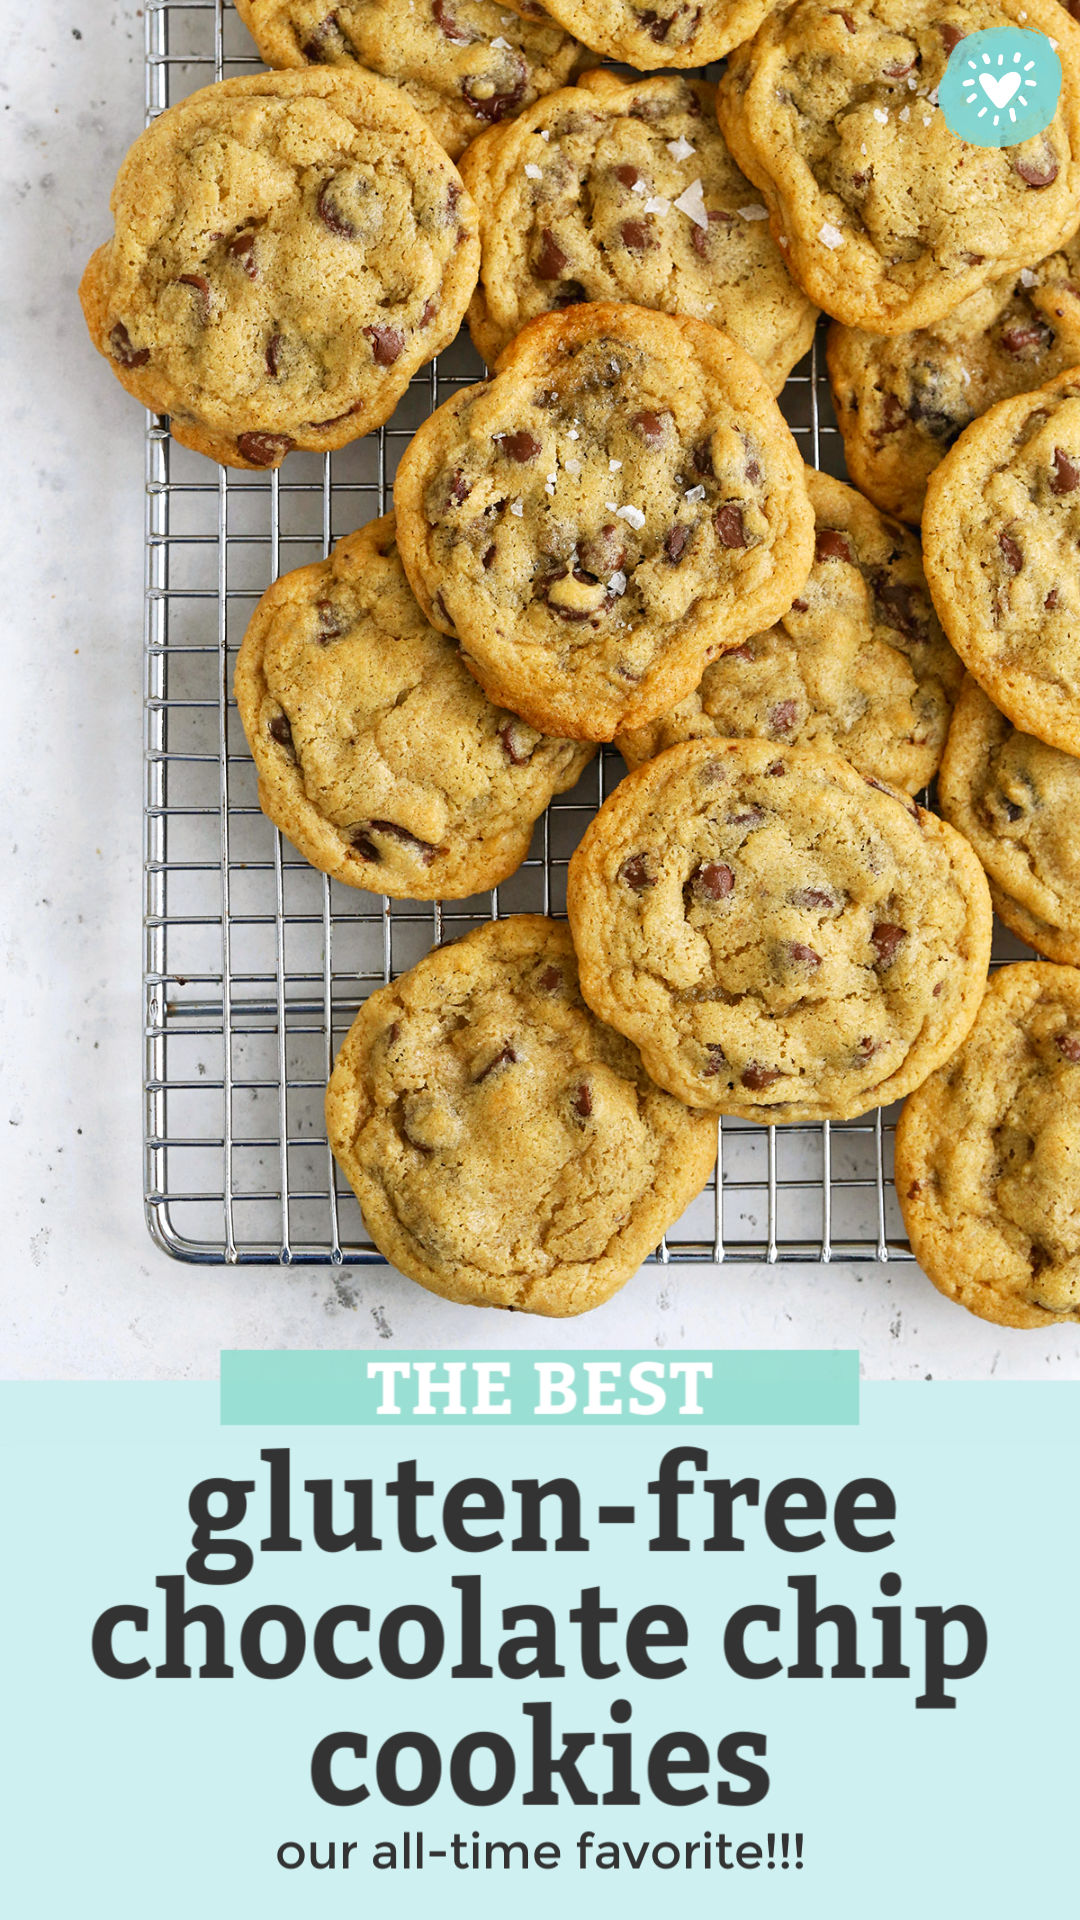 Overhead view of gluten-free chocolate chip cookies cooling on a cooling rack with text overlay that reads "The Best Gluten Free Chocolate Chip Cookies. Our all-time favorite!"